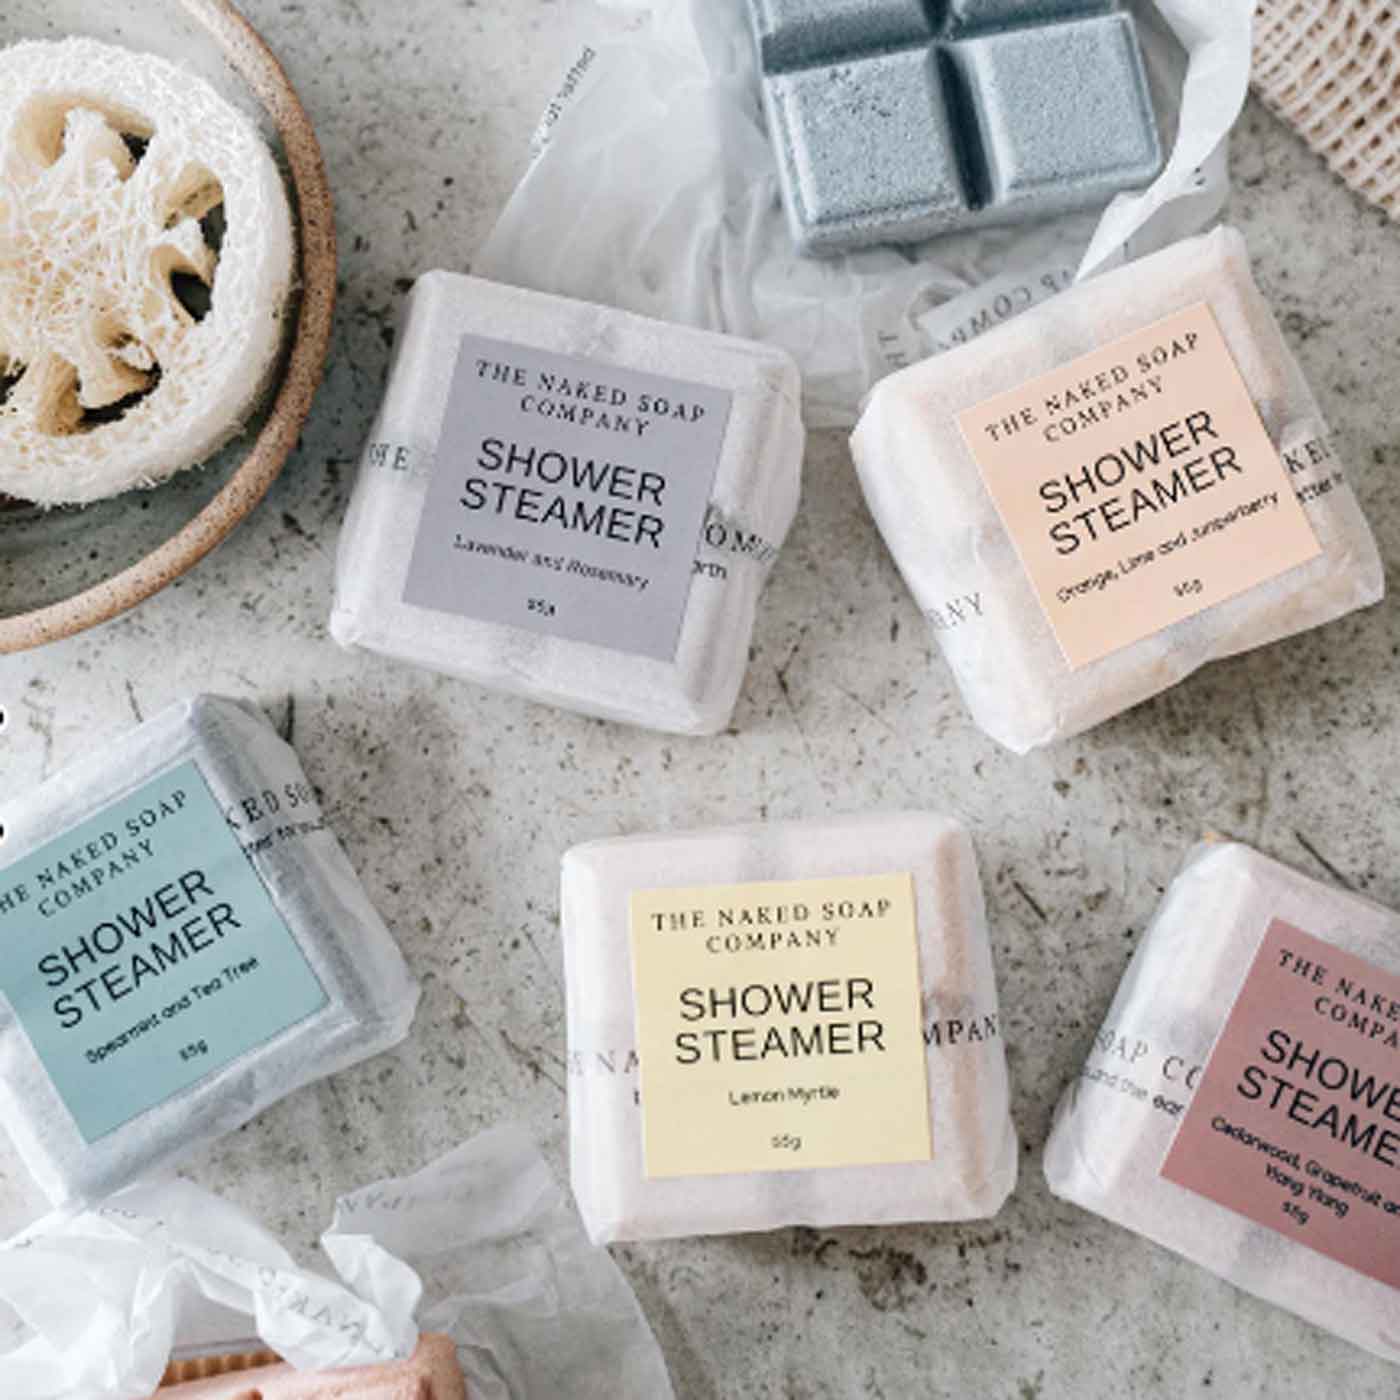 The naked soap company all natural and plastic free shower steamers. Variety of scents. Diminish.